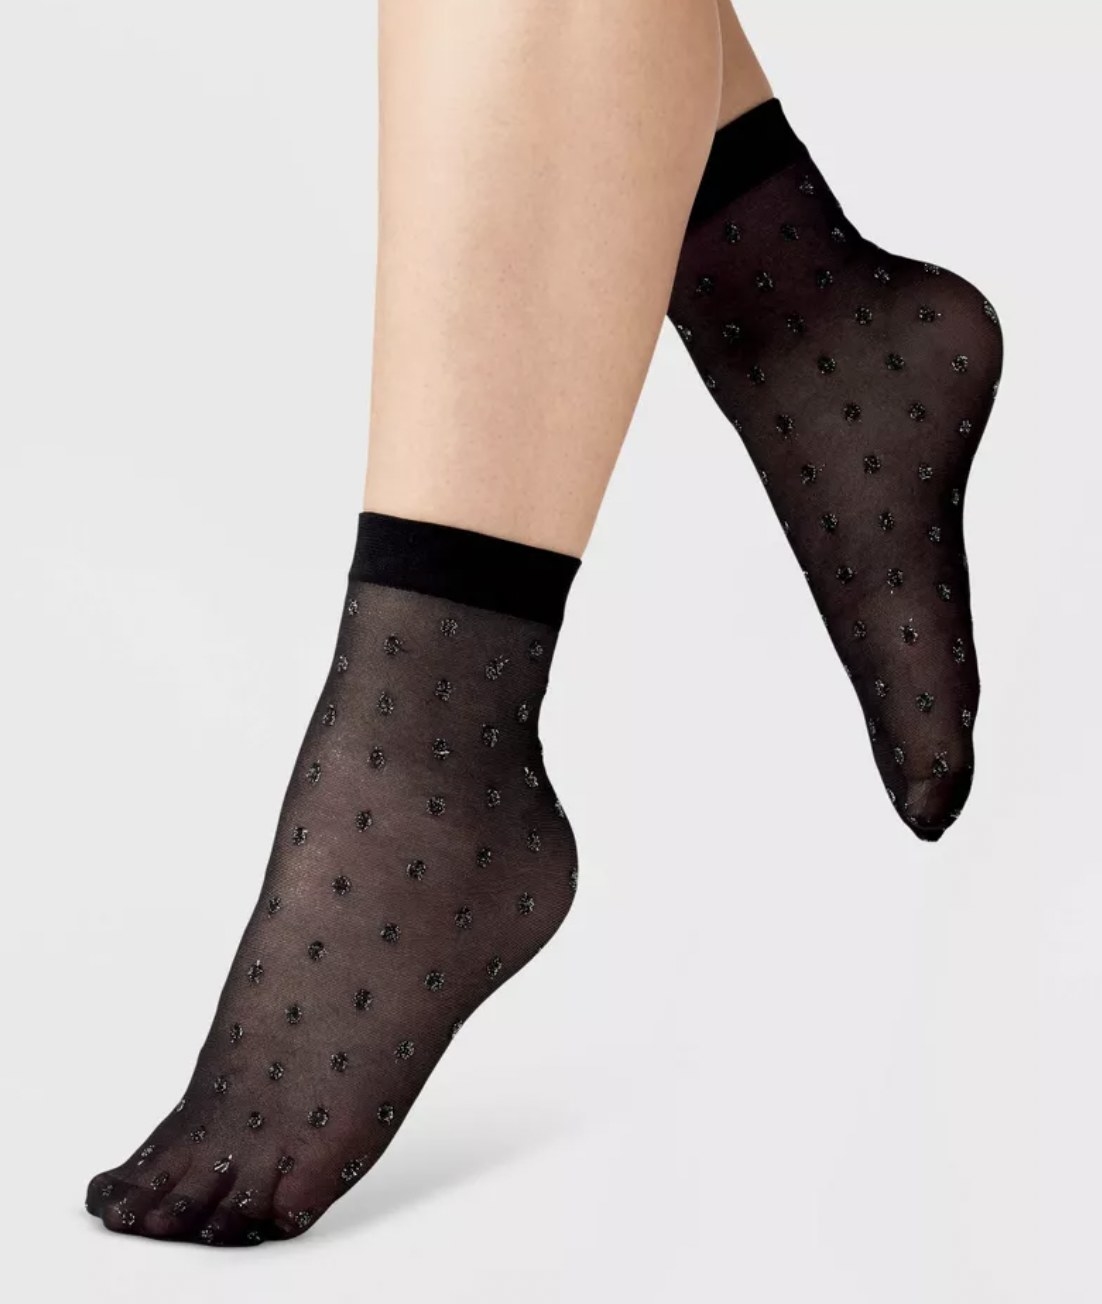 a model wearing the black sheer sparkly socks